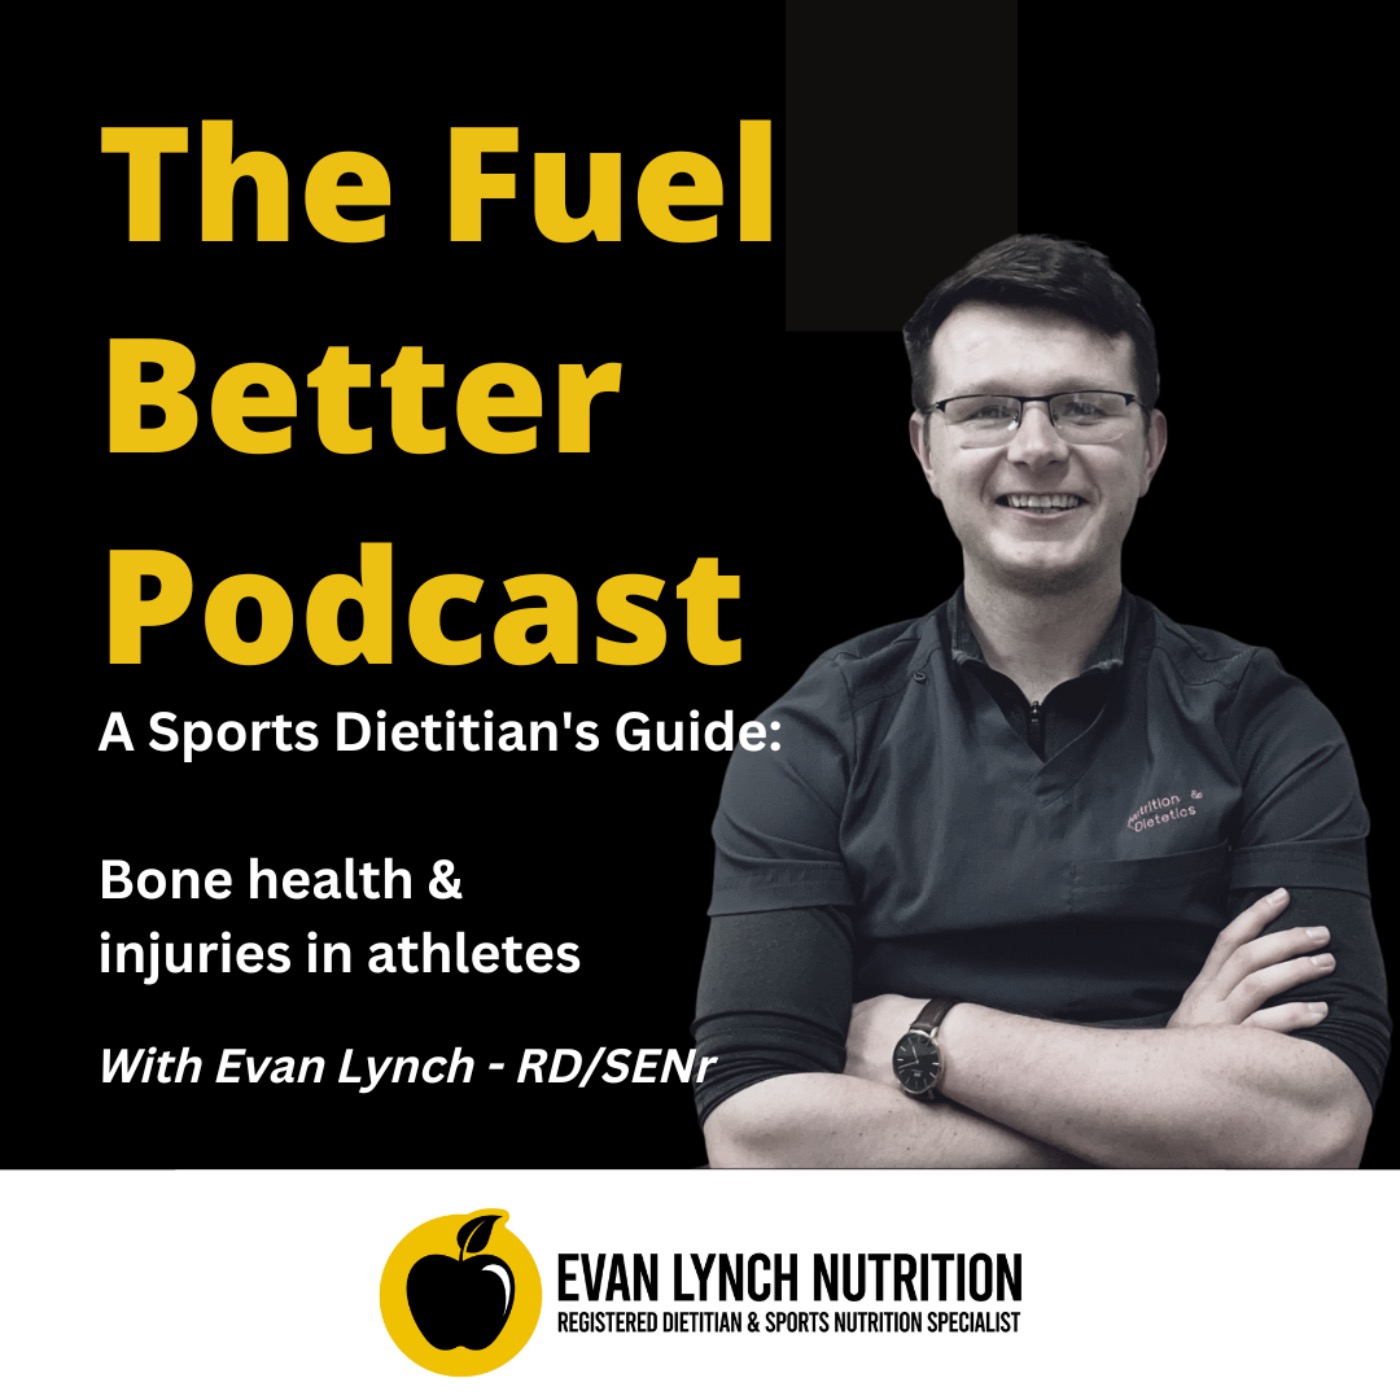 A sports dietitian's guide: Bone health & injuries in athletes